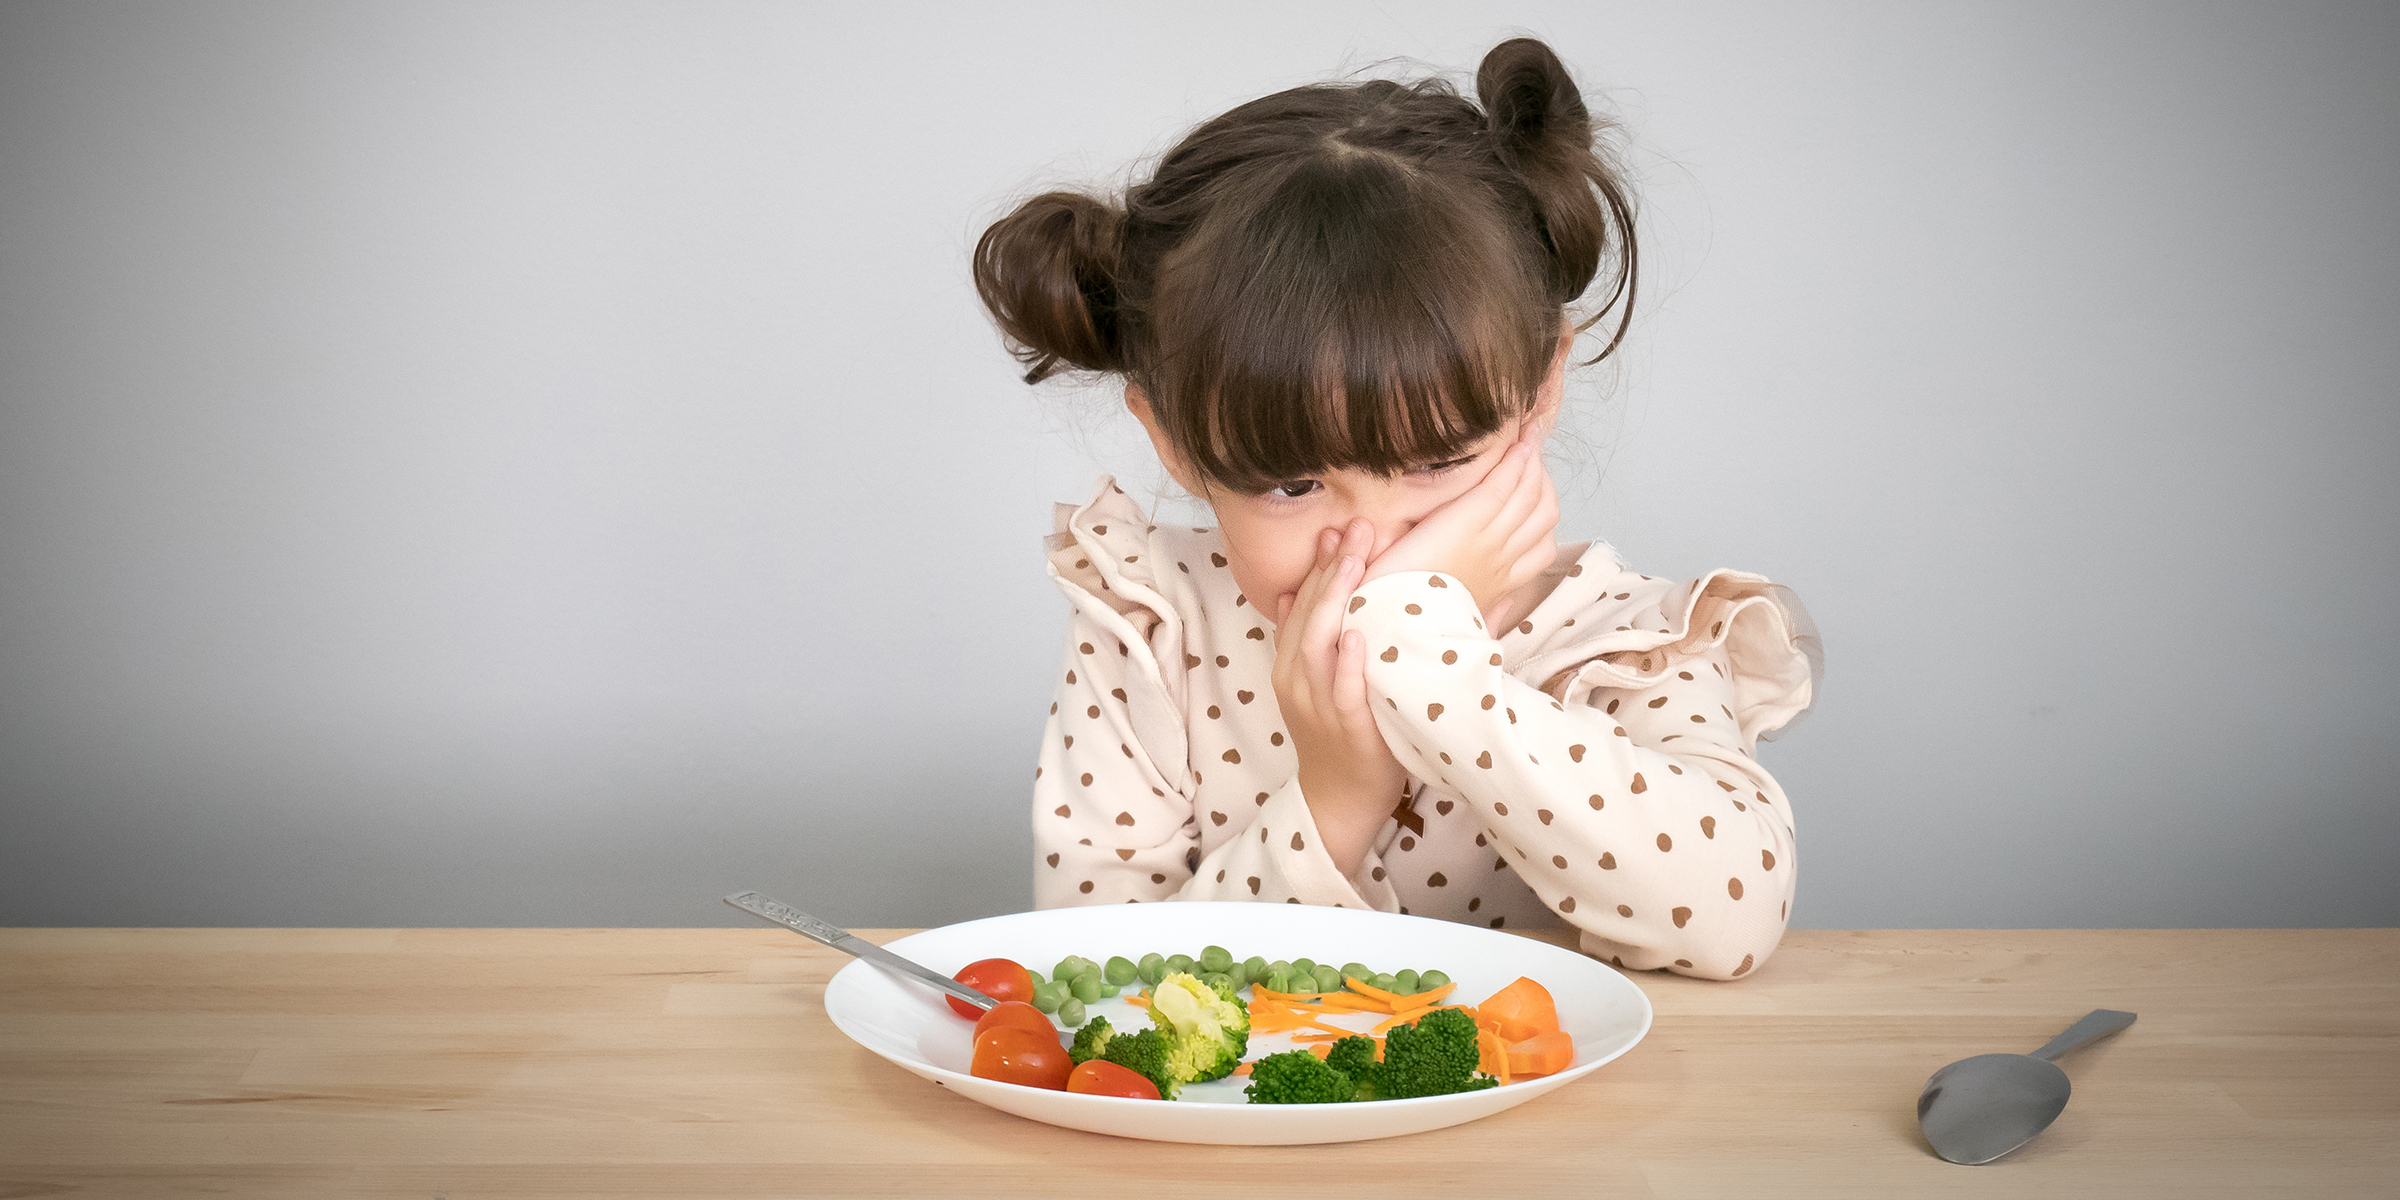 Children Don't Want To Eat Vegetables